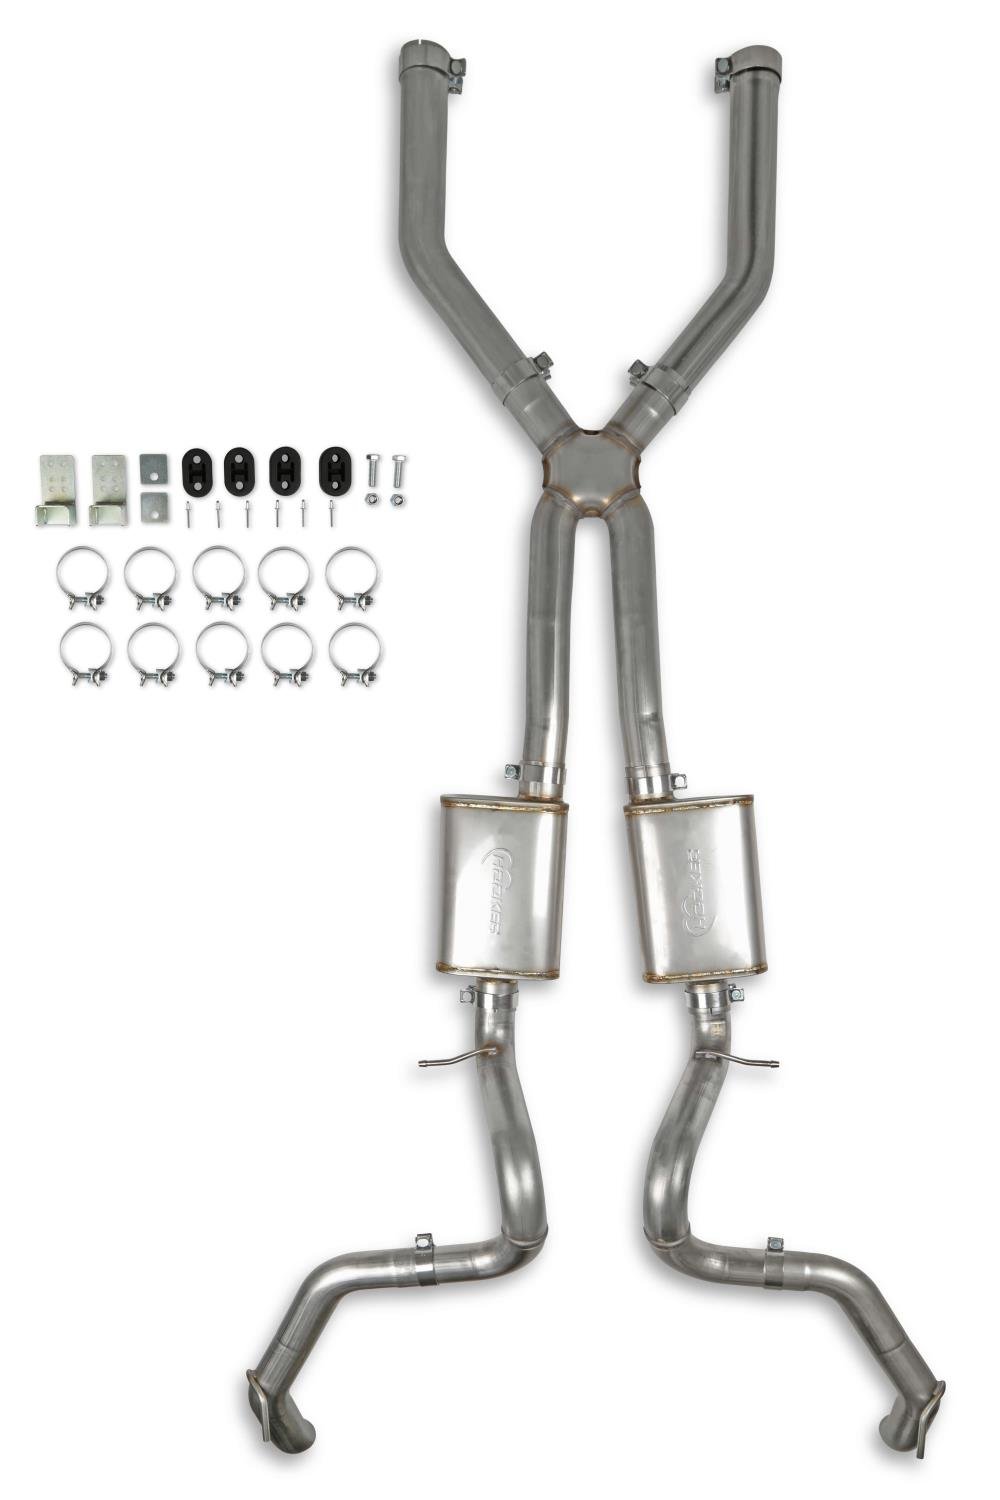 Blackheart Crossmember-Back Dual 3 in. Stainless Exhaust System for 1975-1981 Chevy Camaro, Pontiac Firebird